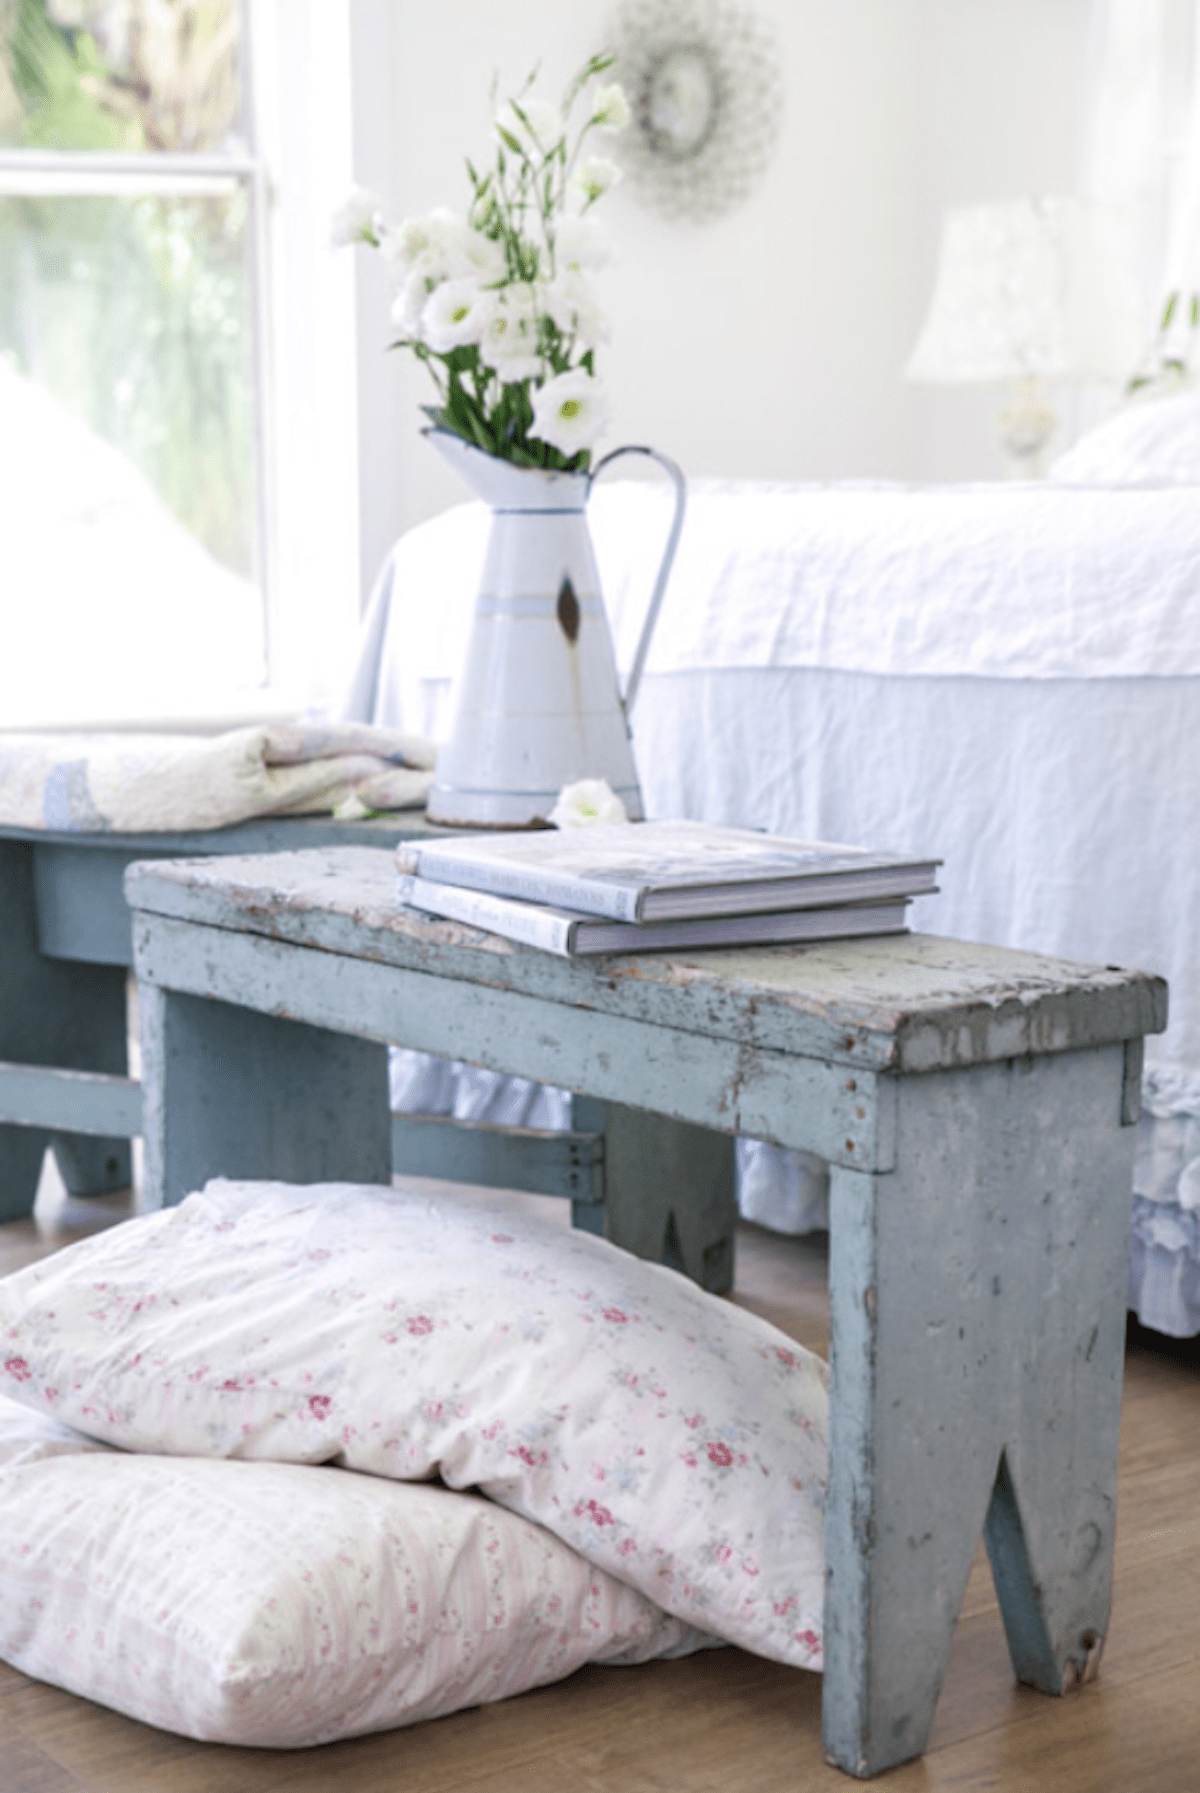 Vintage blue benches in summer decor